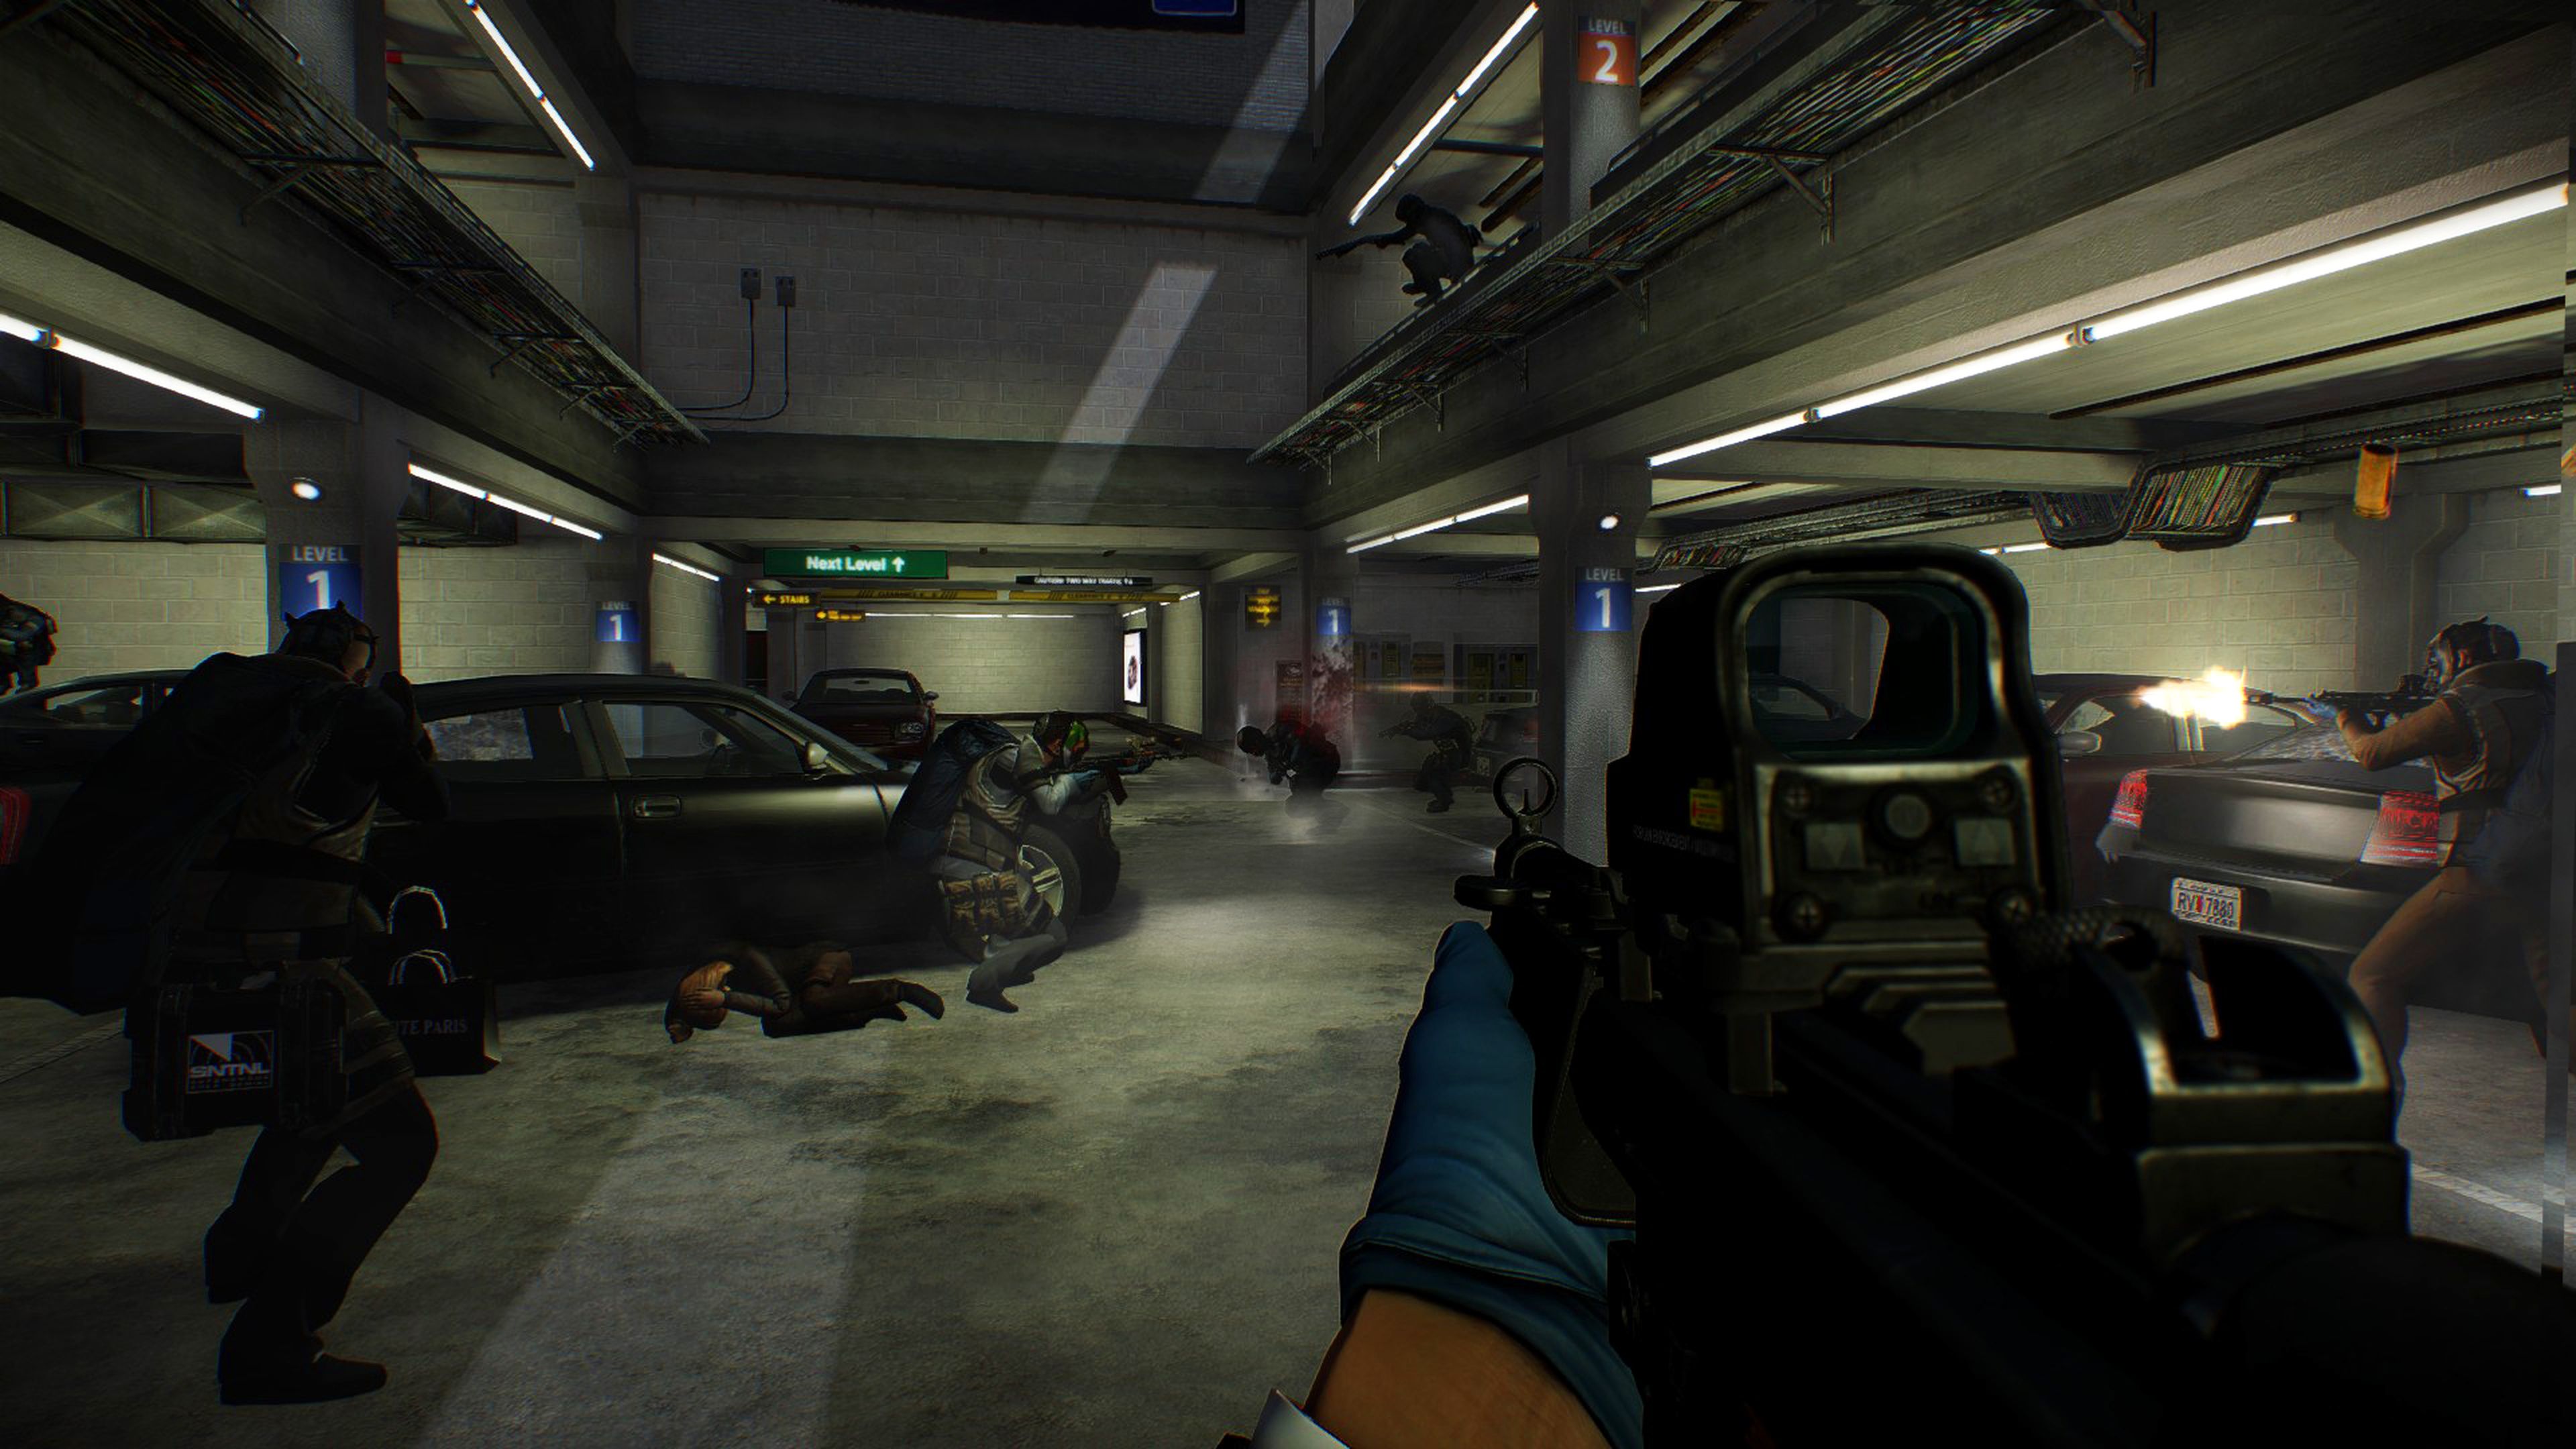 Payday 2 game. Payday 2 Скриншоты. Payday 2 Скриншоты игры. Payday 2 screenshot. Payday 2 Скриншоты из игры.